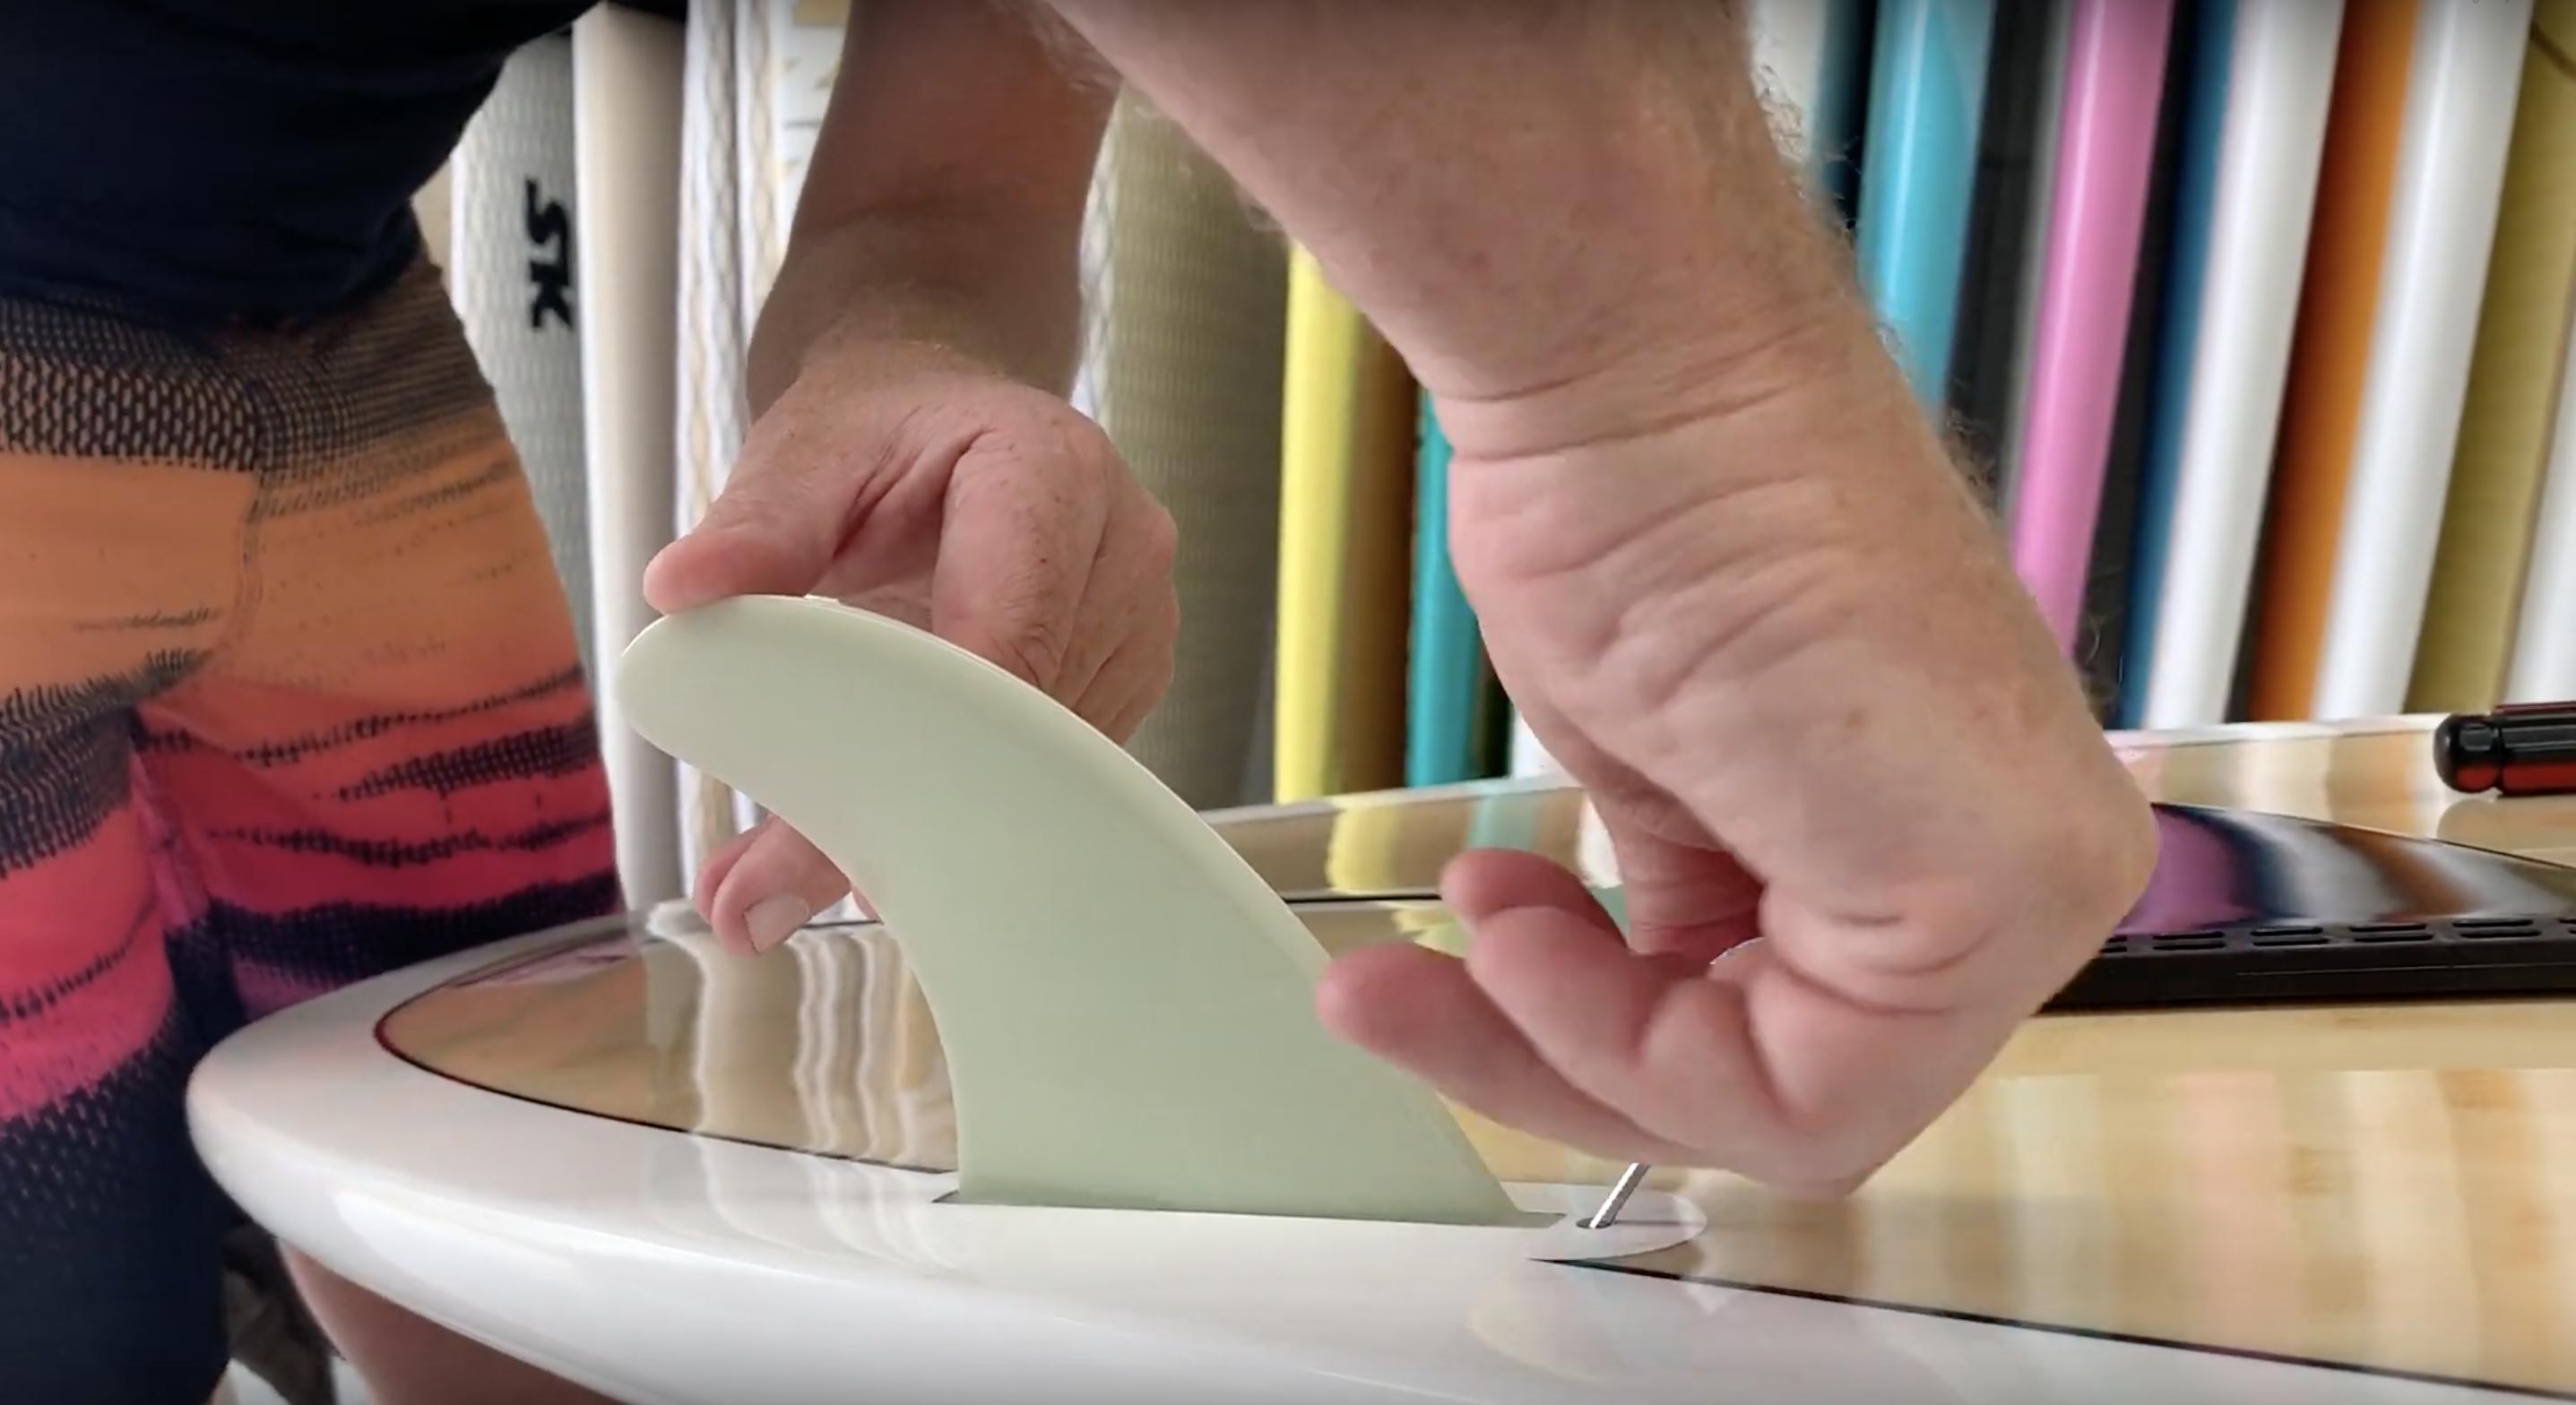 SUP TIPS - Installing Paddleboard Fin Set